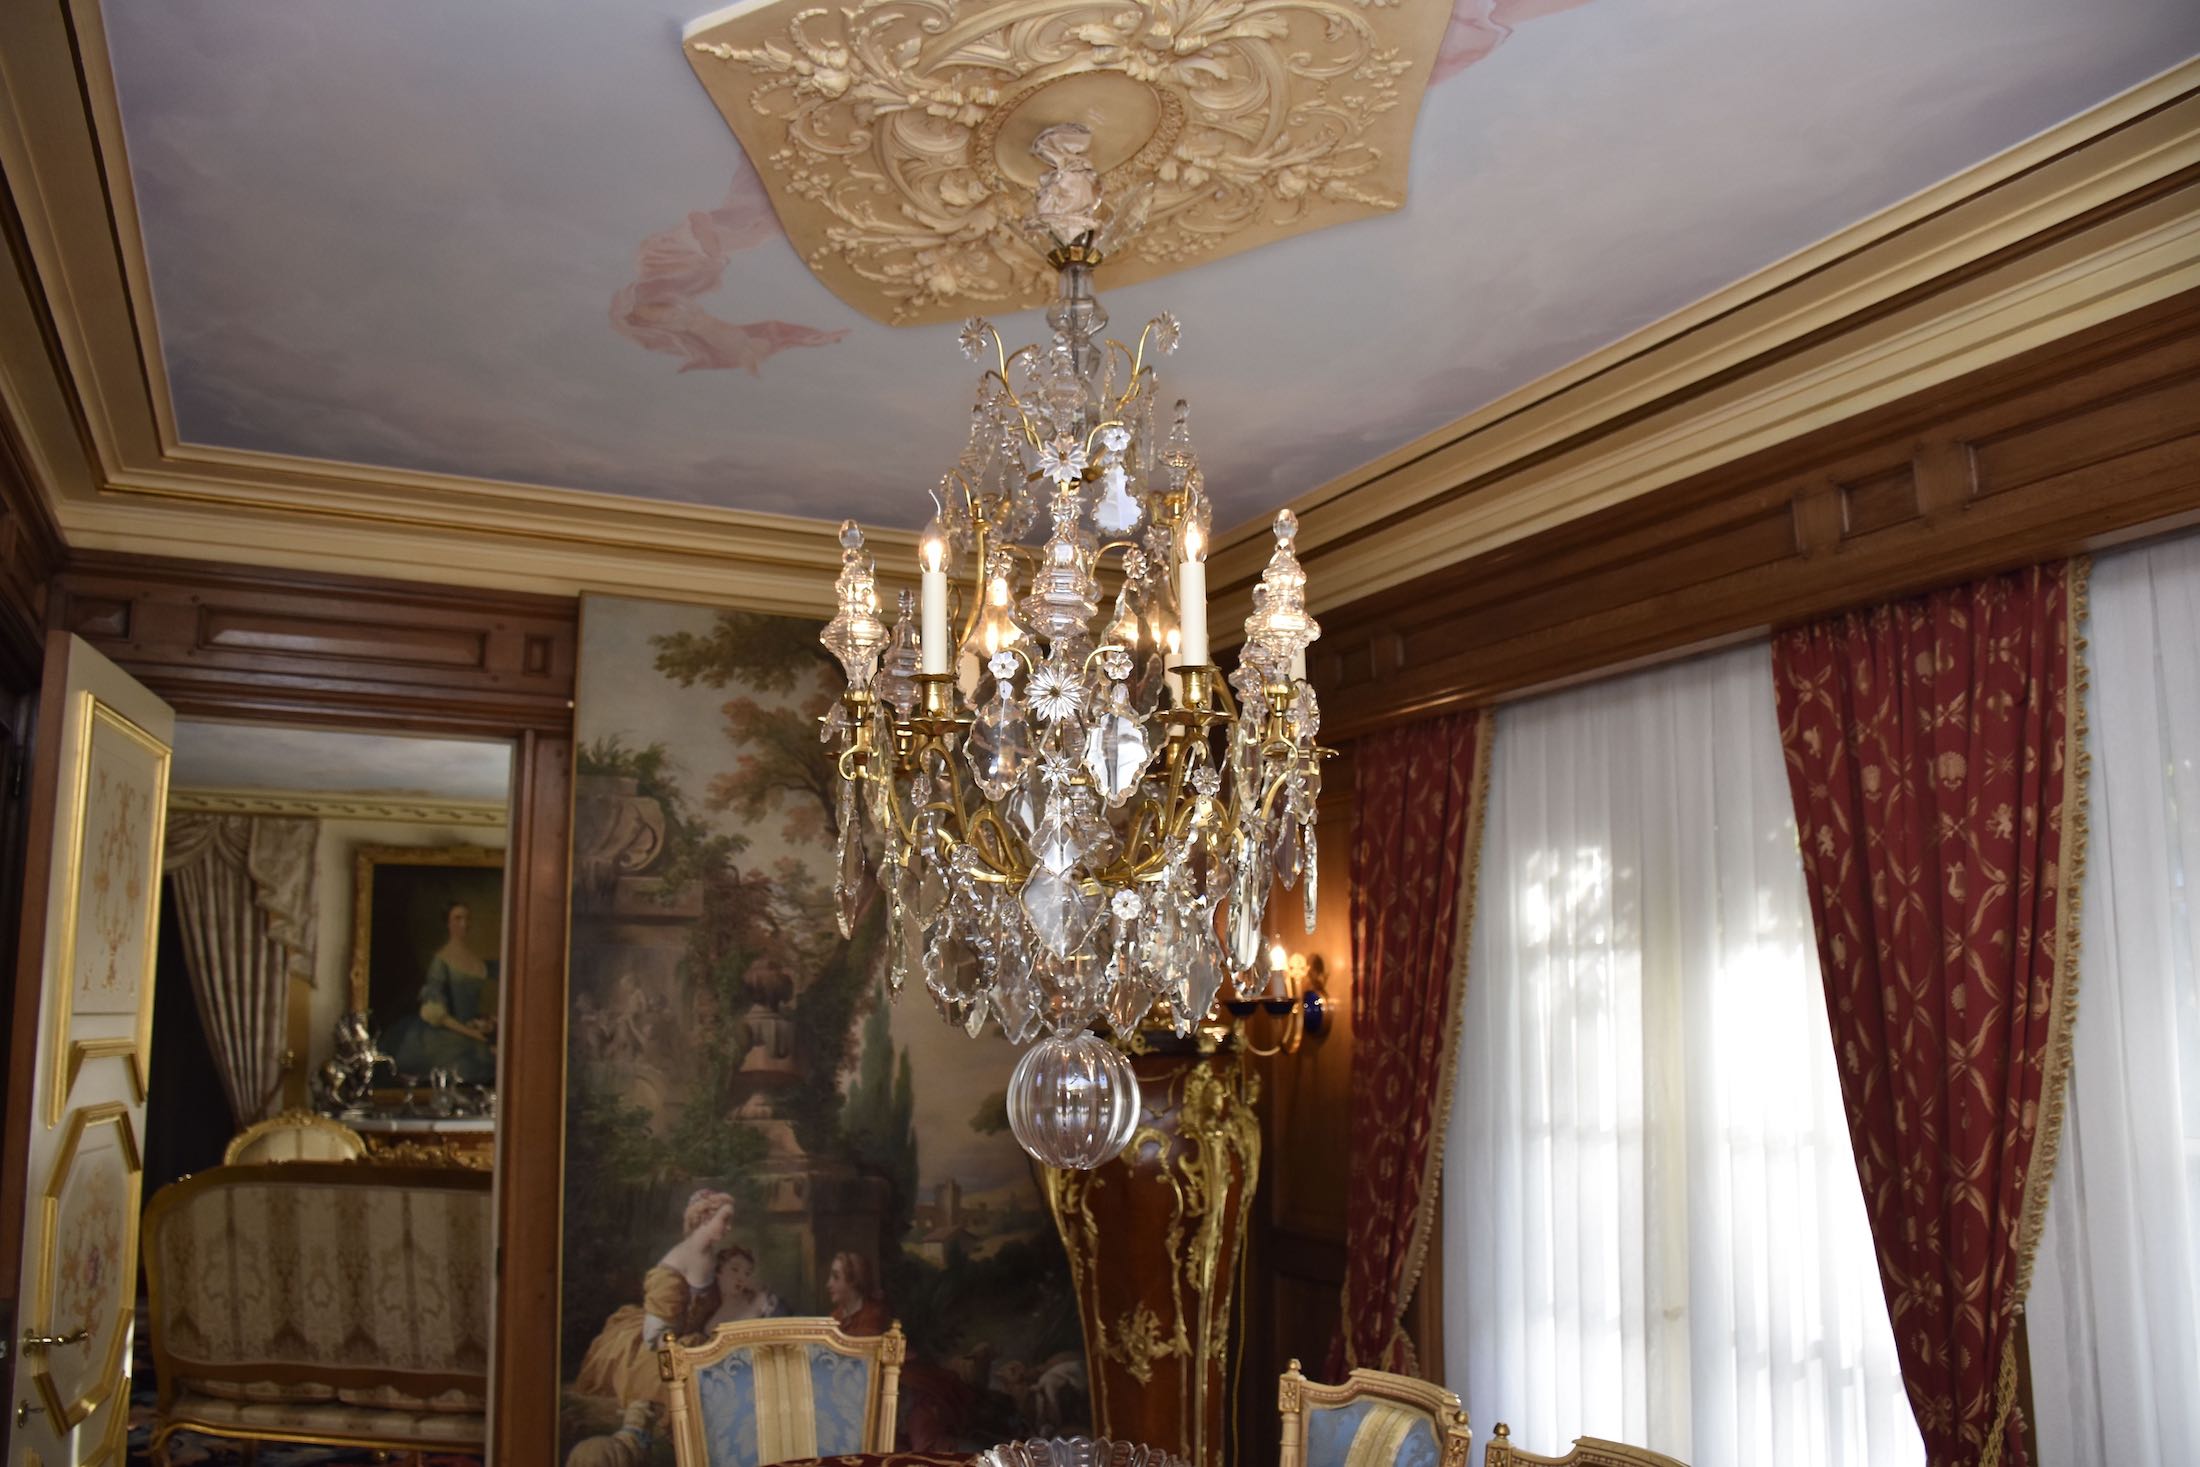 18th c. chandelier in a classic interior